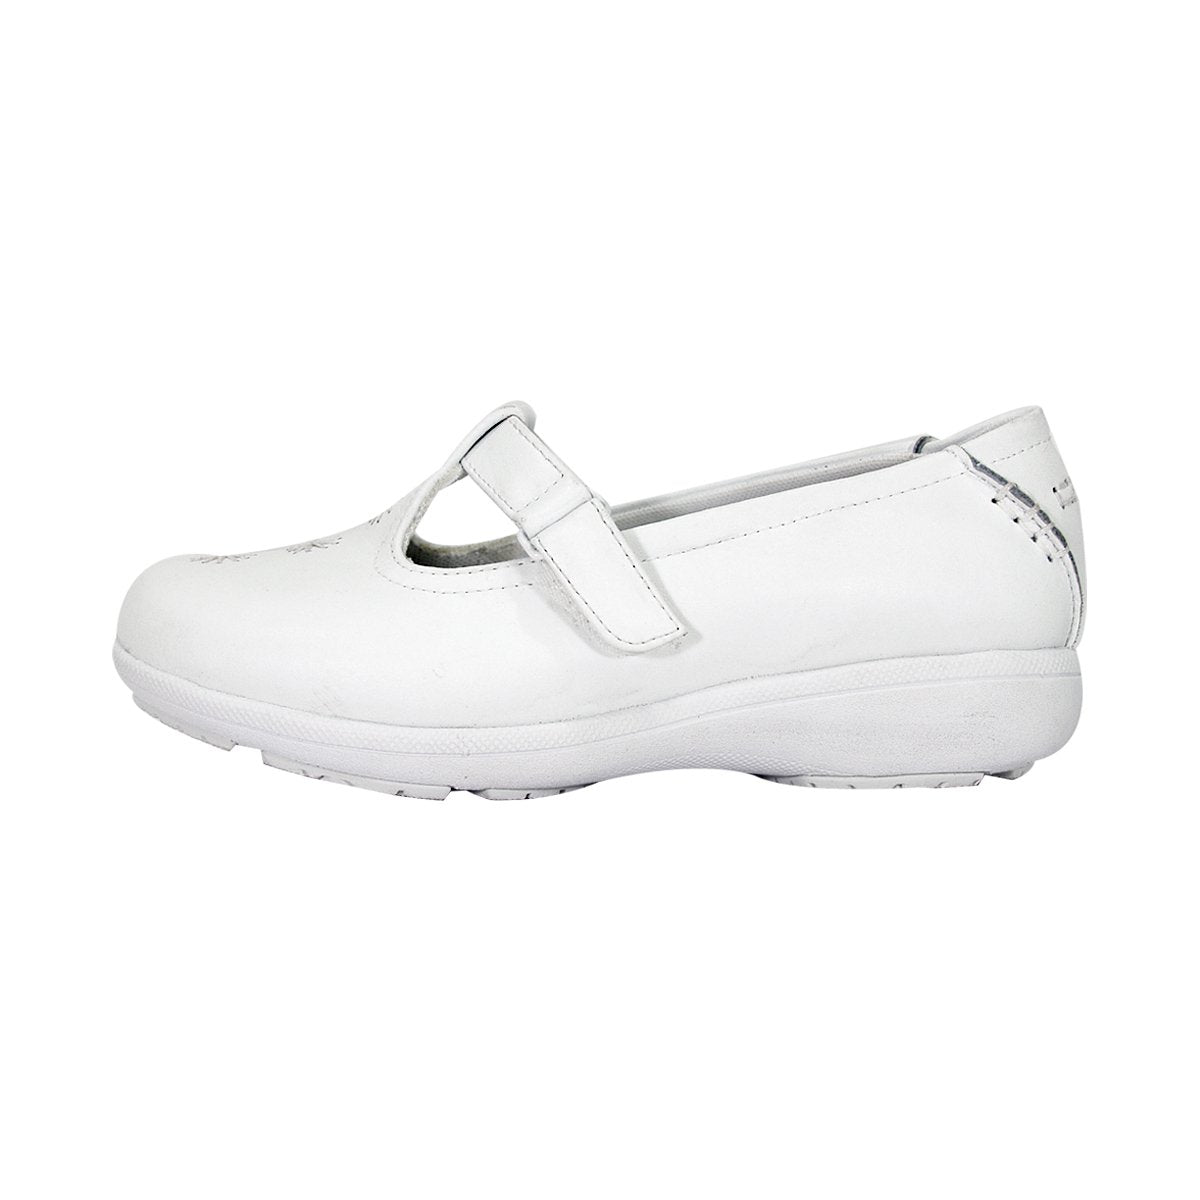 24 HOUR COMFORT Lily Women's Wide Width Leather Shoes